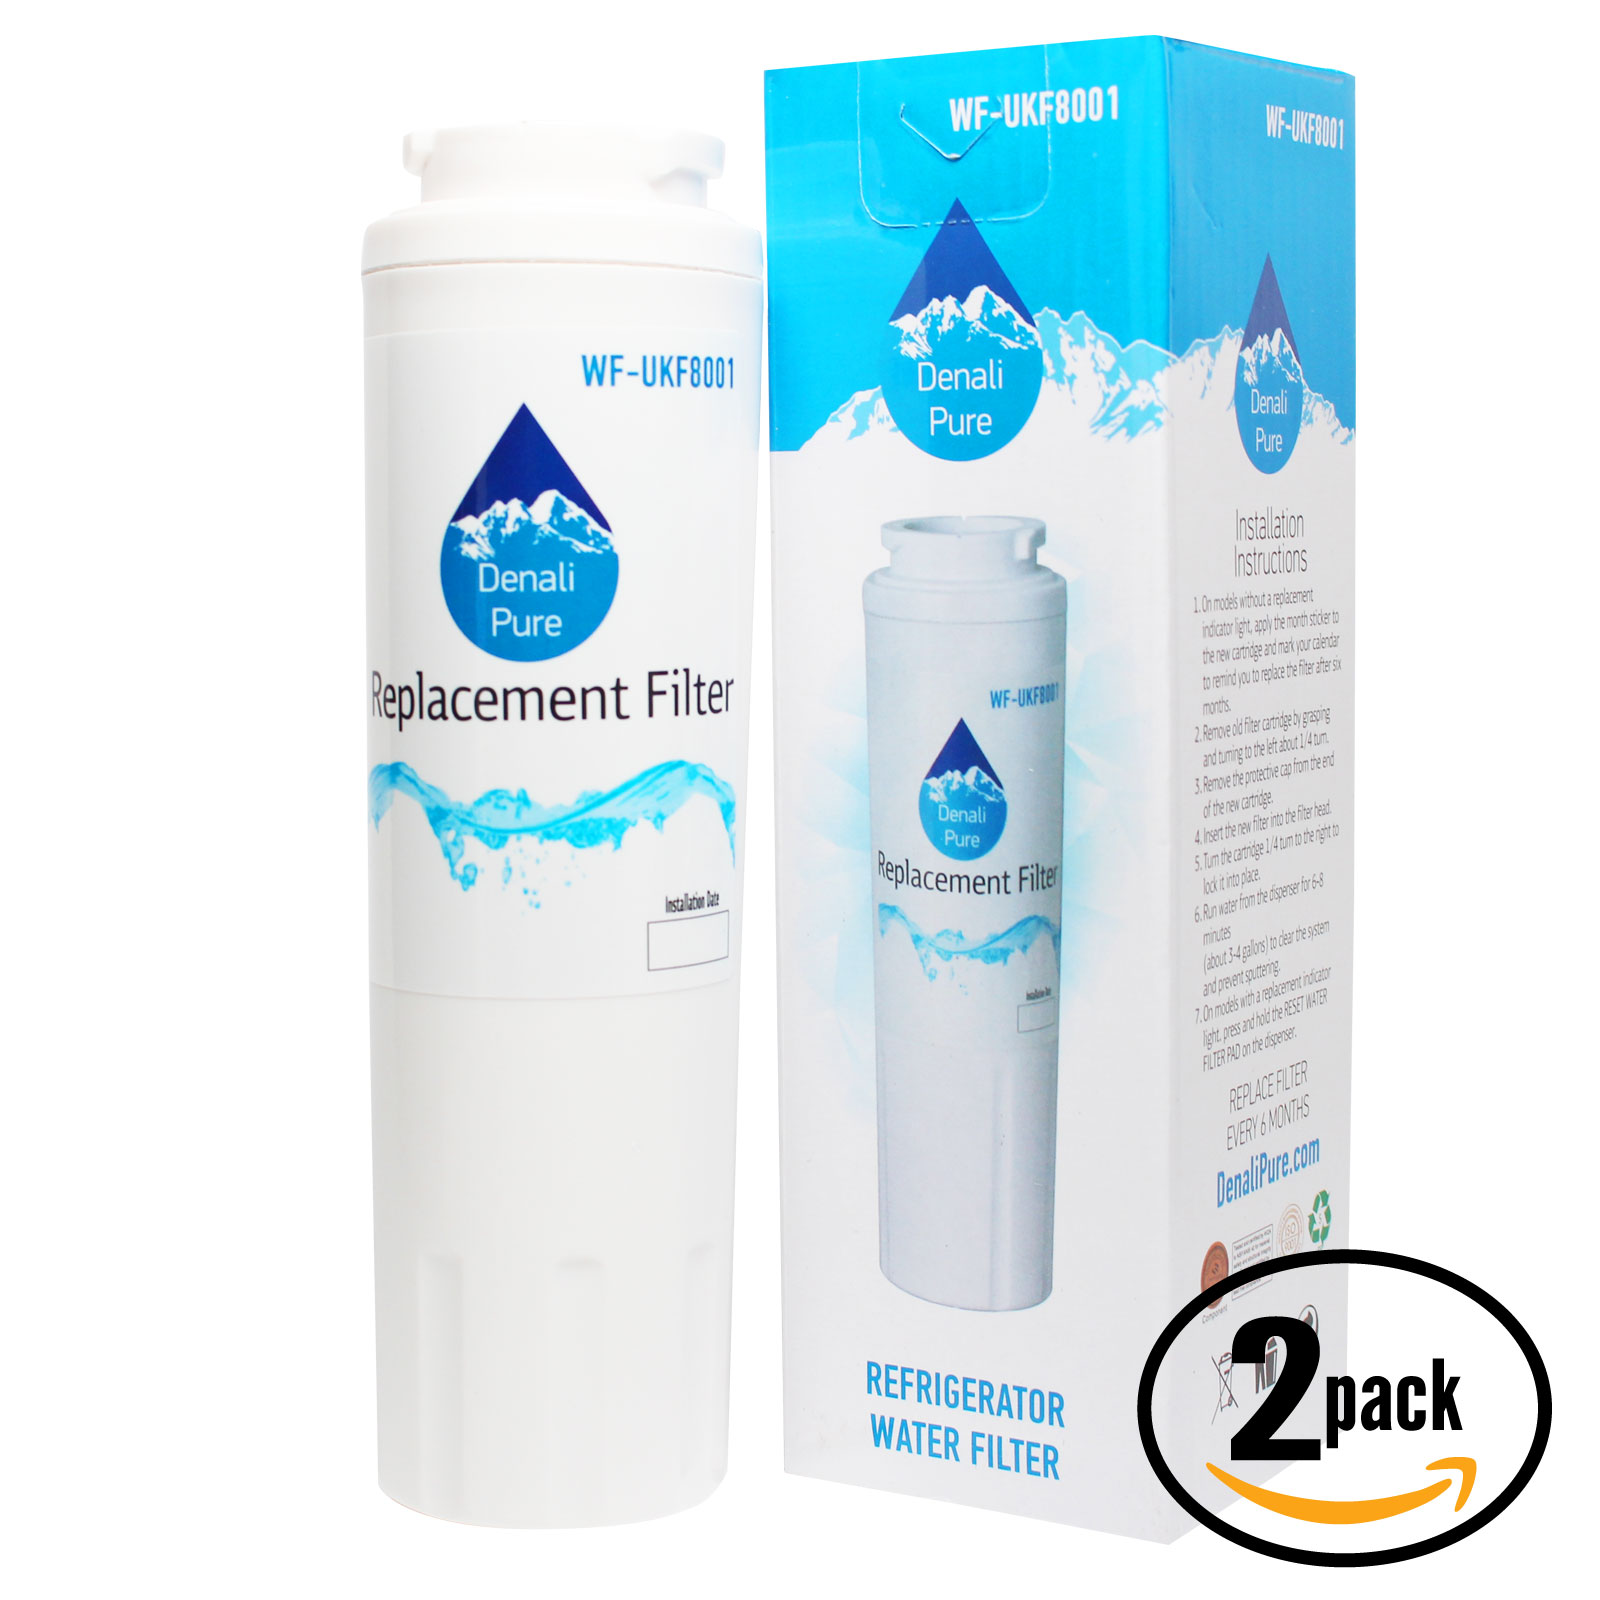 2-Pack Compatible with Maytag MFI2067AES5 Refrigerator Water Filter - Compatible with Maytag UKF8001 Fridge Water Filter Cartridge - image 1 of 4